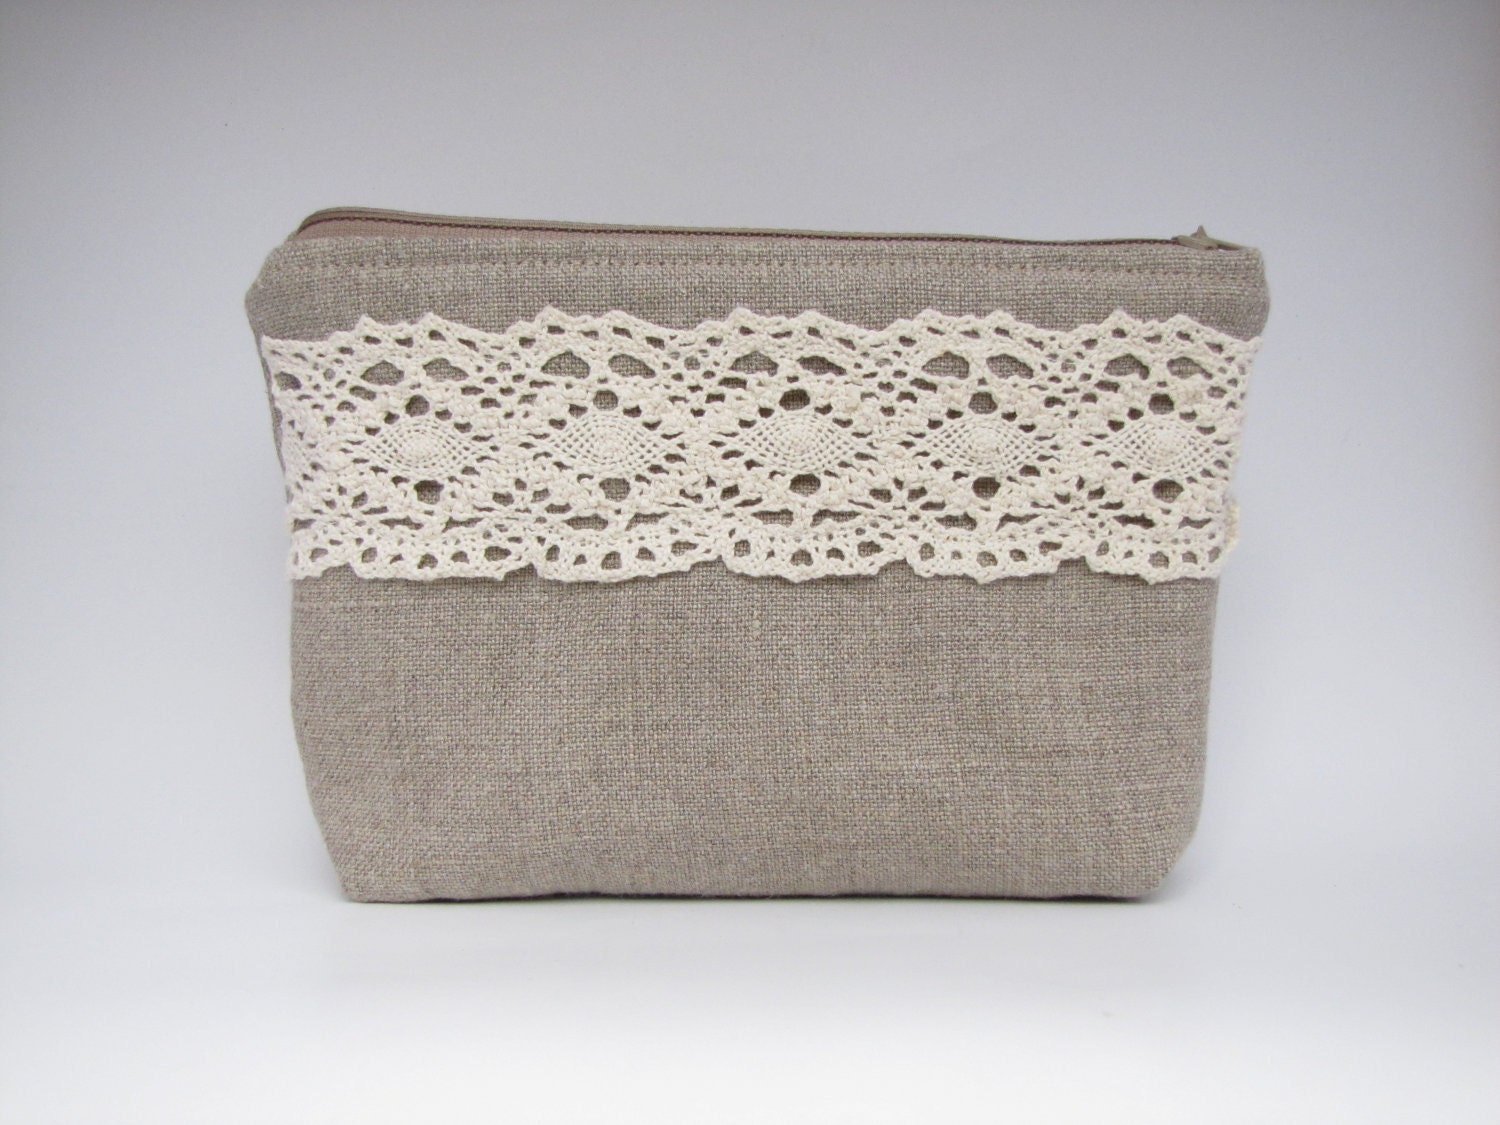 Linen and lace cosmetic bag, zipper pouch, make-up pouch, small clutch